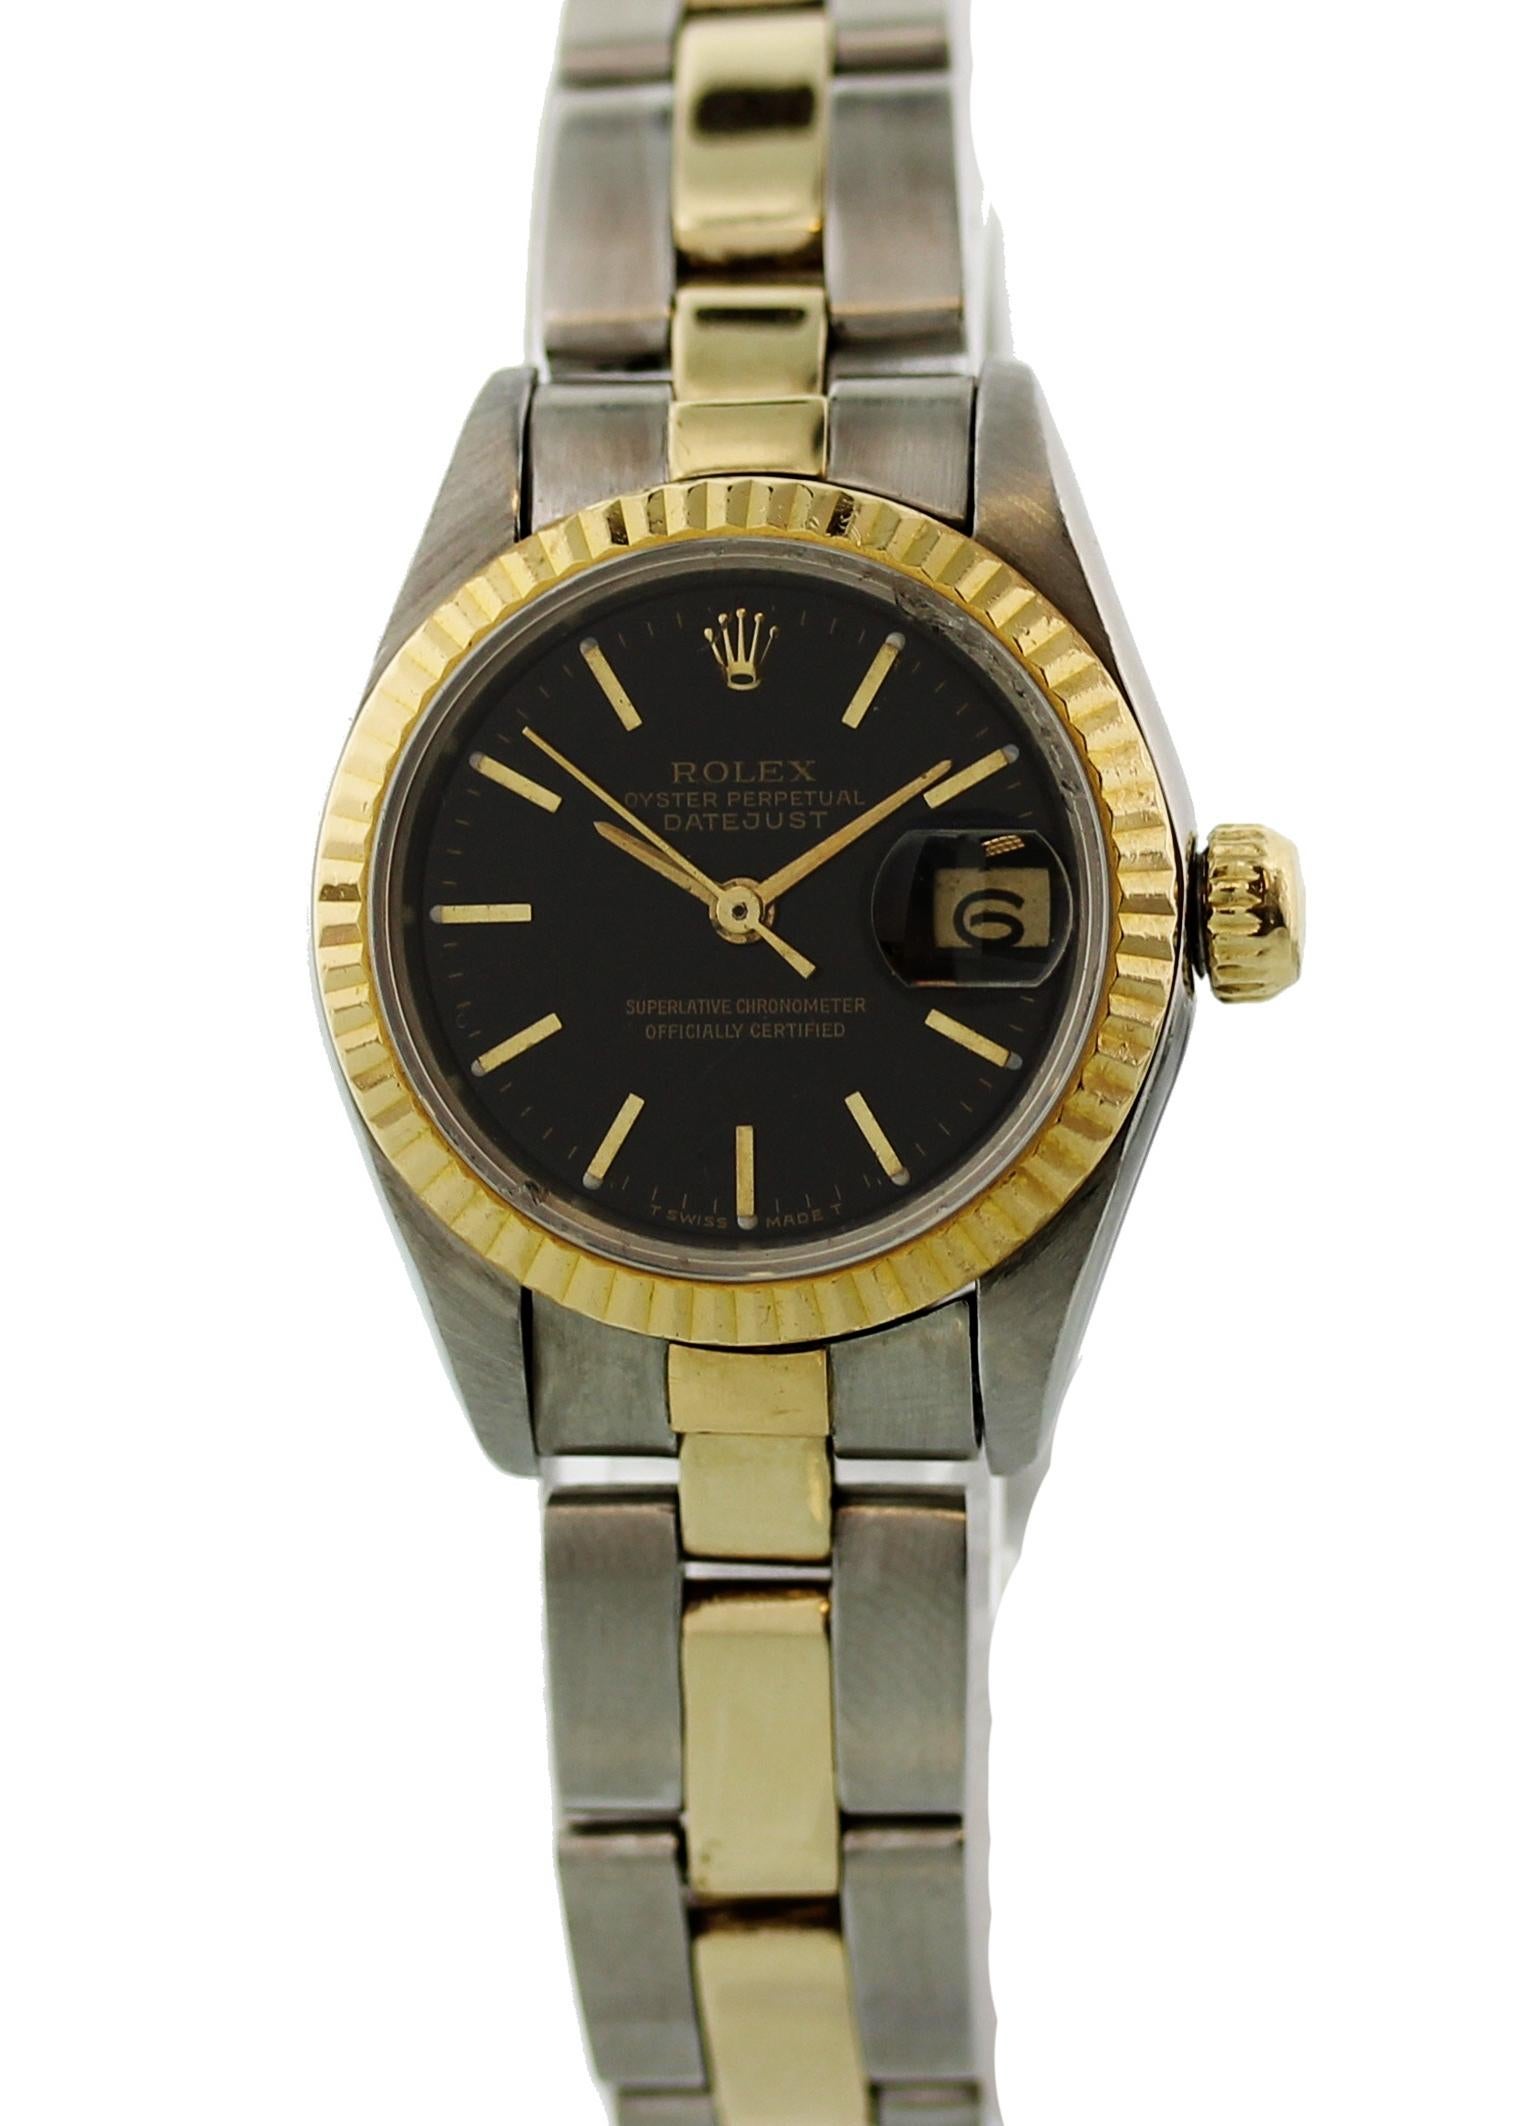 Rolex Datejust 69173 Ladies Watch. 26mm Stainless steel case. 18k yellow gold fluted bezel. Black dial with gold indexes and luminescent markers. Date display. Stainless steel and 18k yellow gold Oyster band. Will fit up to 6.5 Inch wrists.